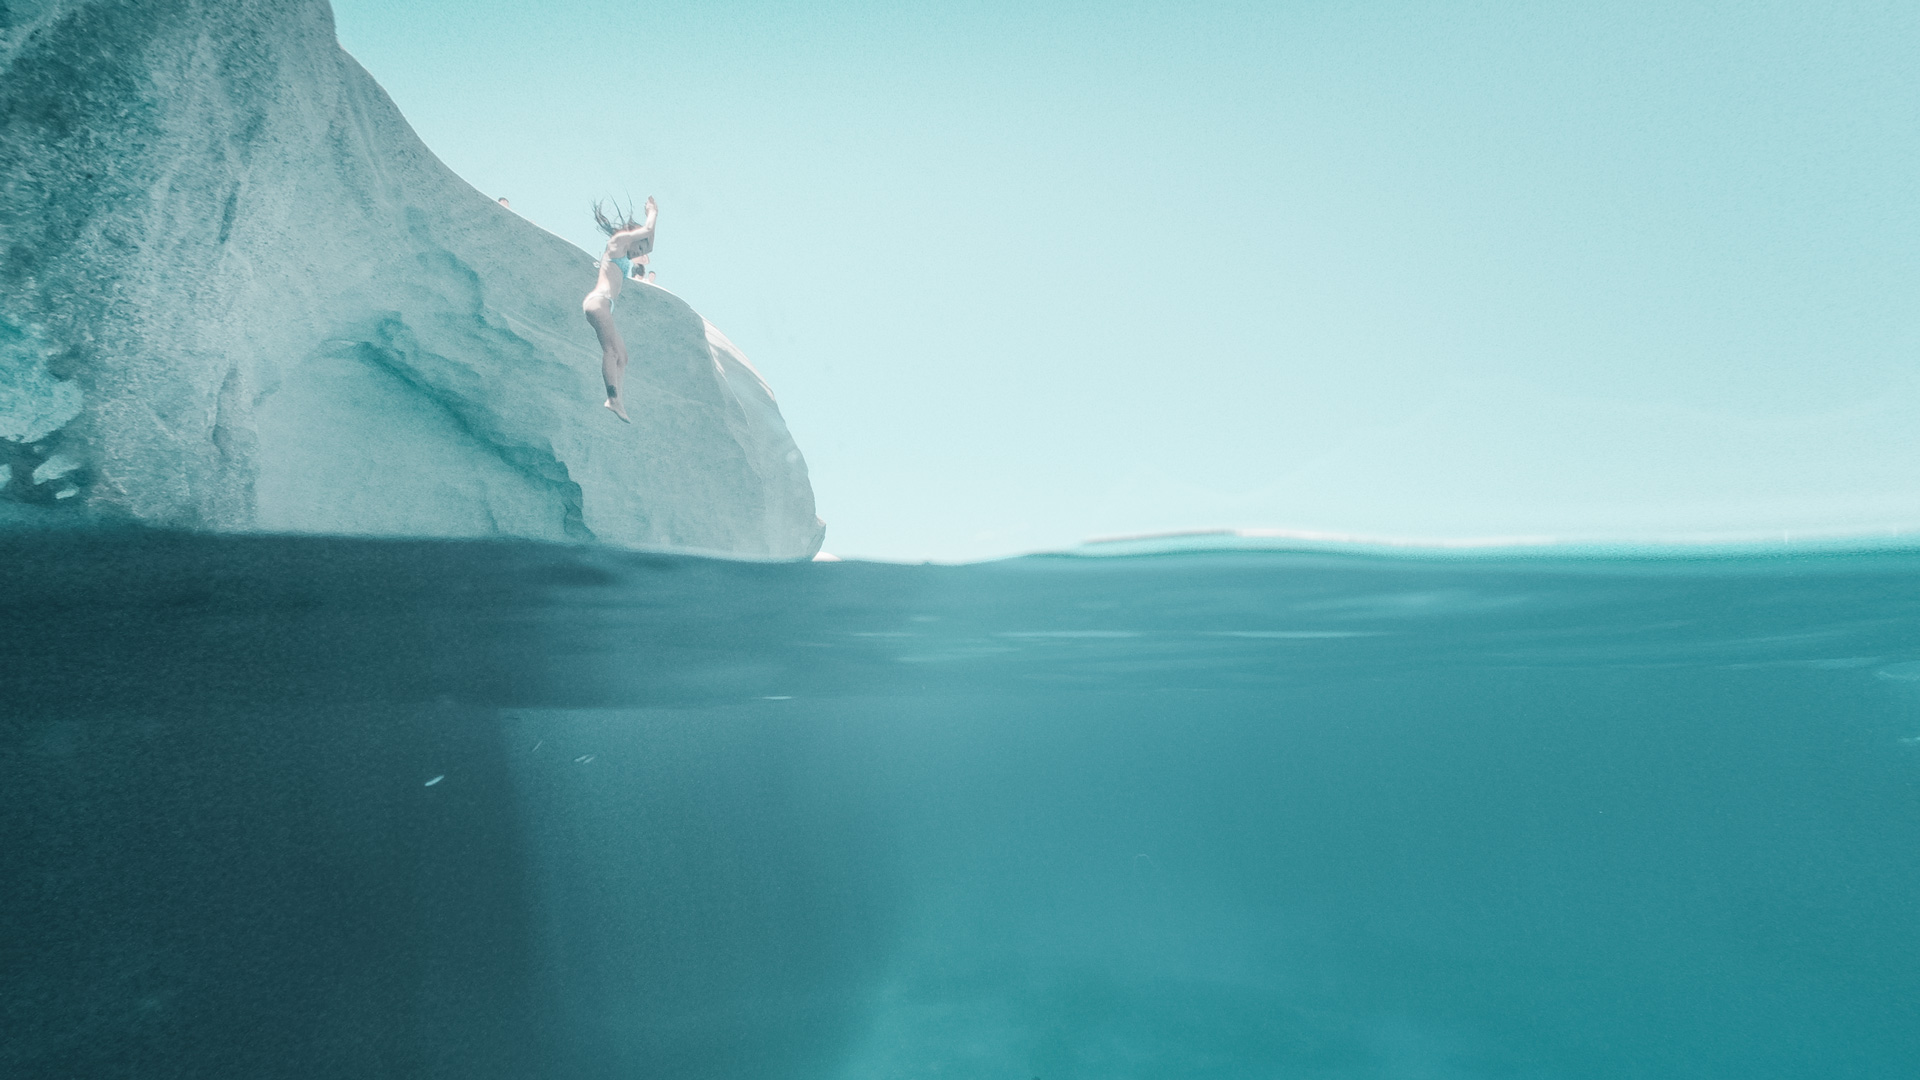 The more daring might opt for some cliff jumping off the rocks into the deep waters below